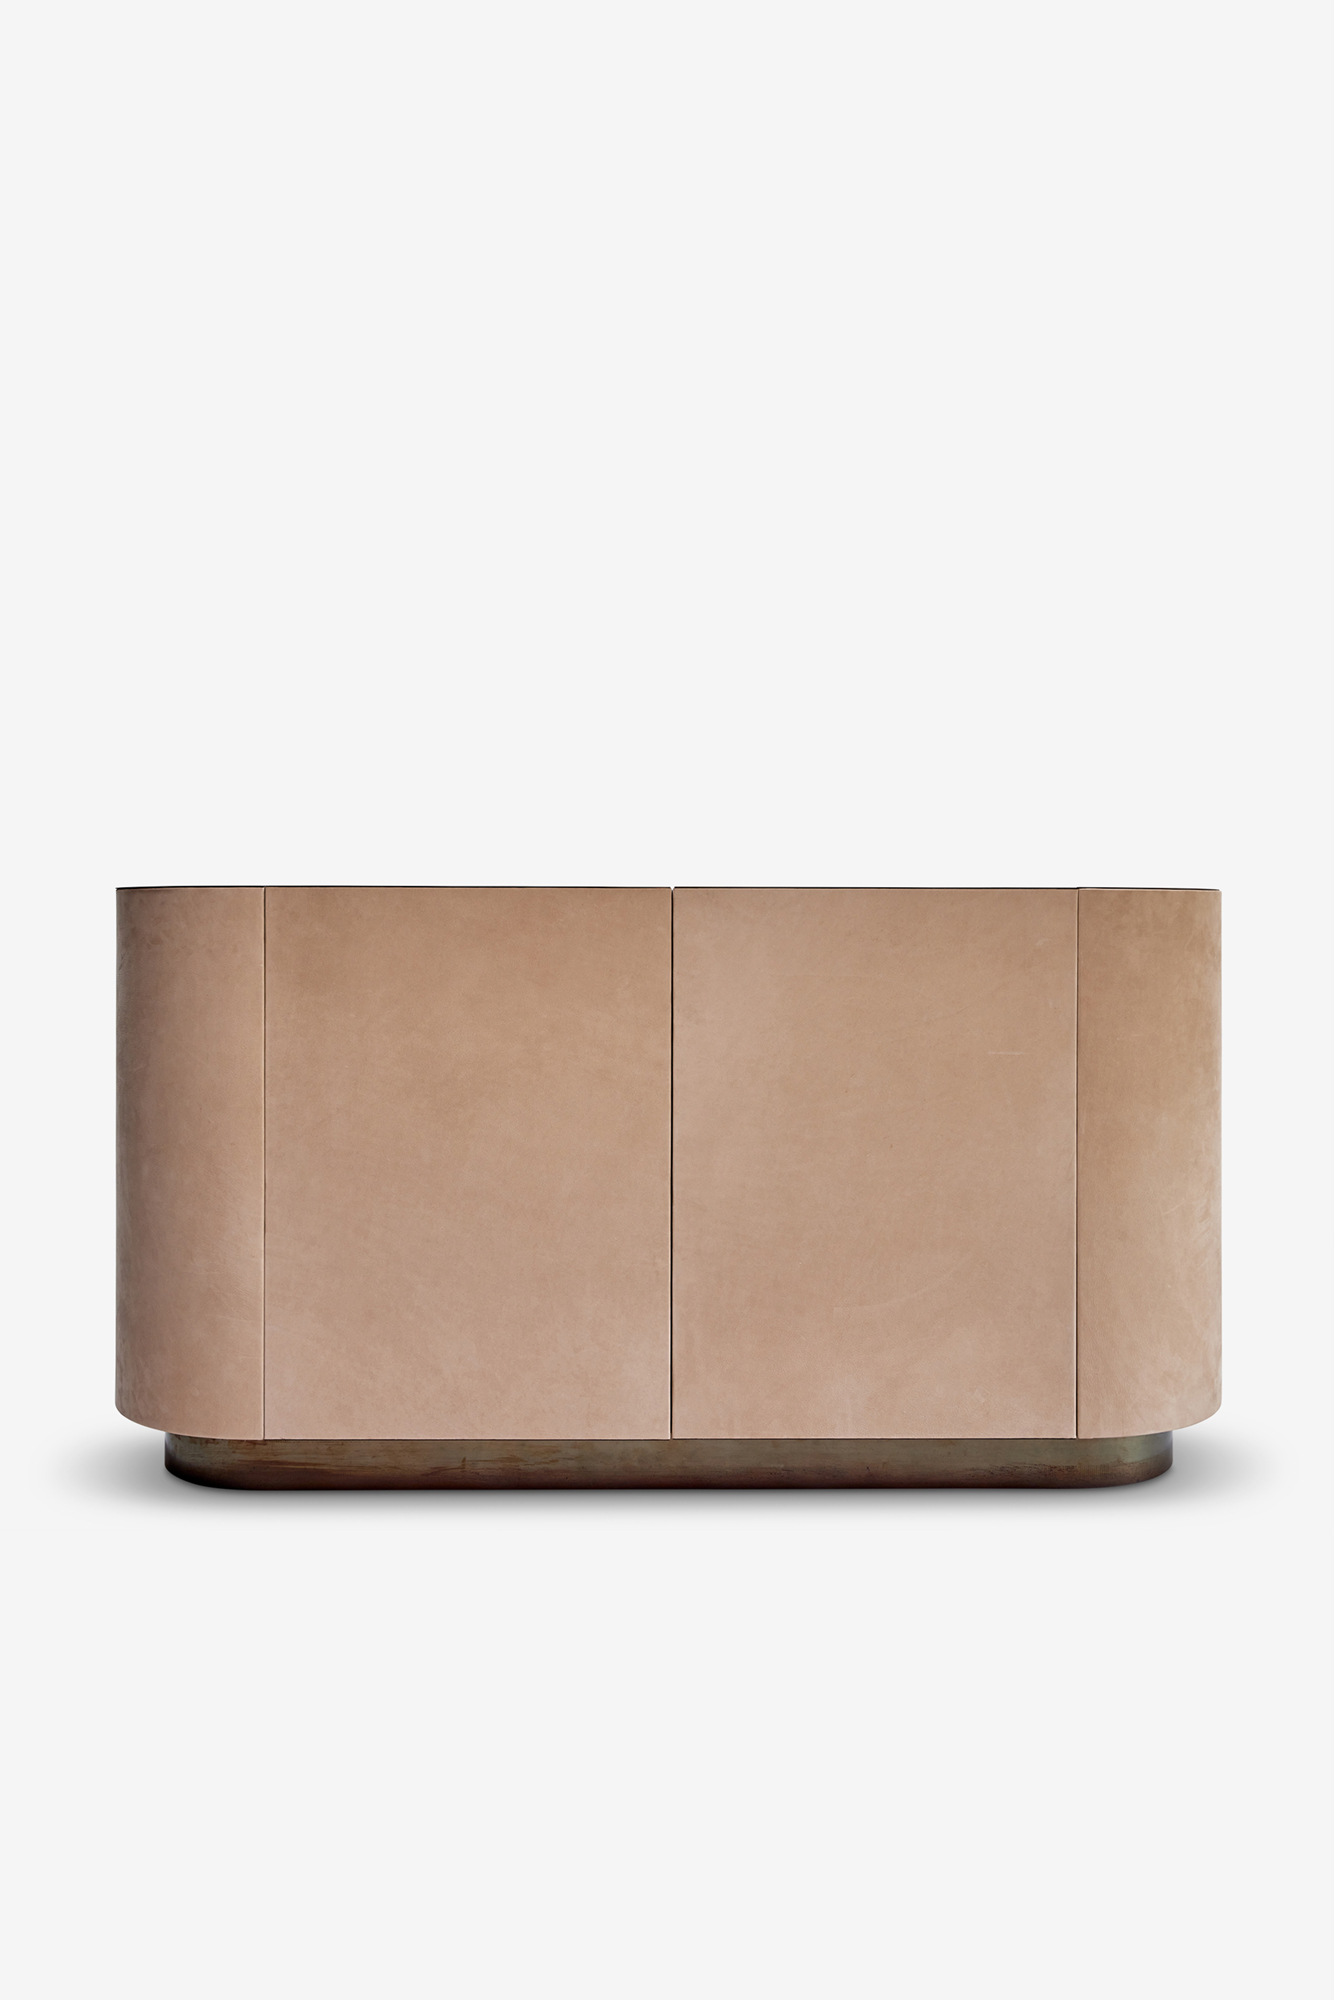 MG305 Credenza in leather and brass